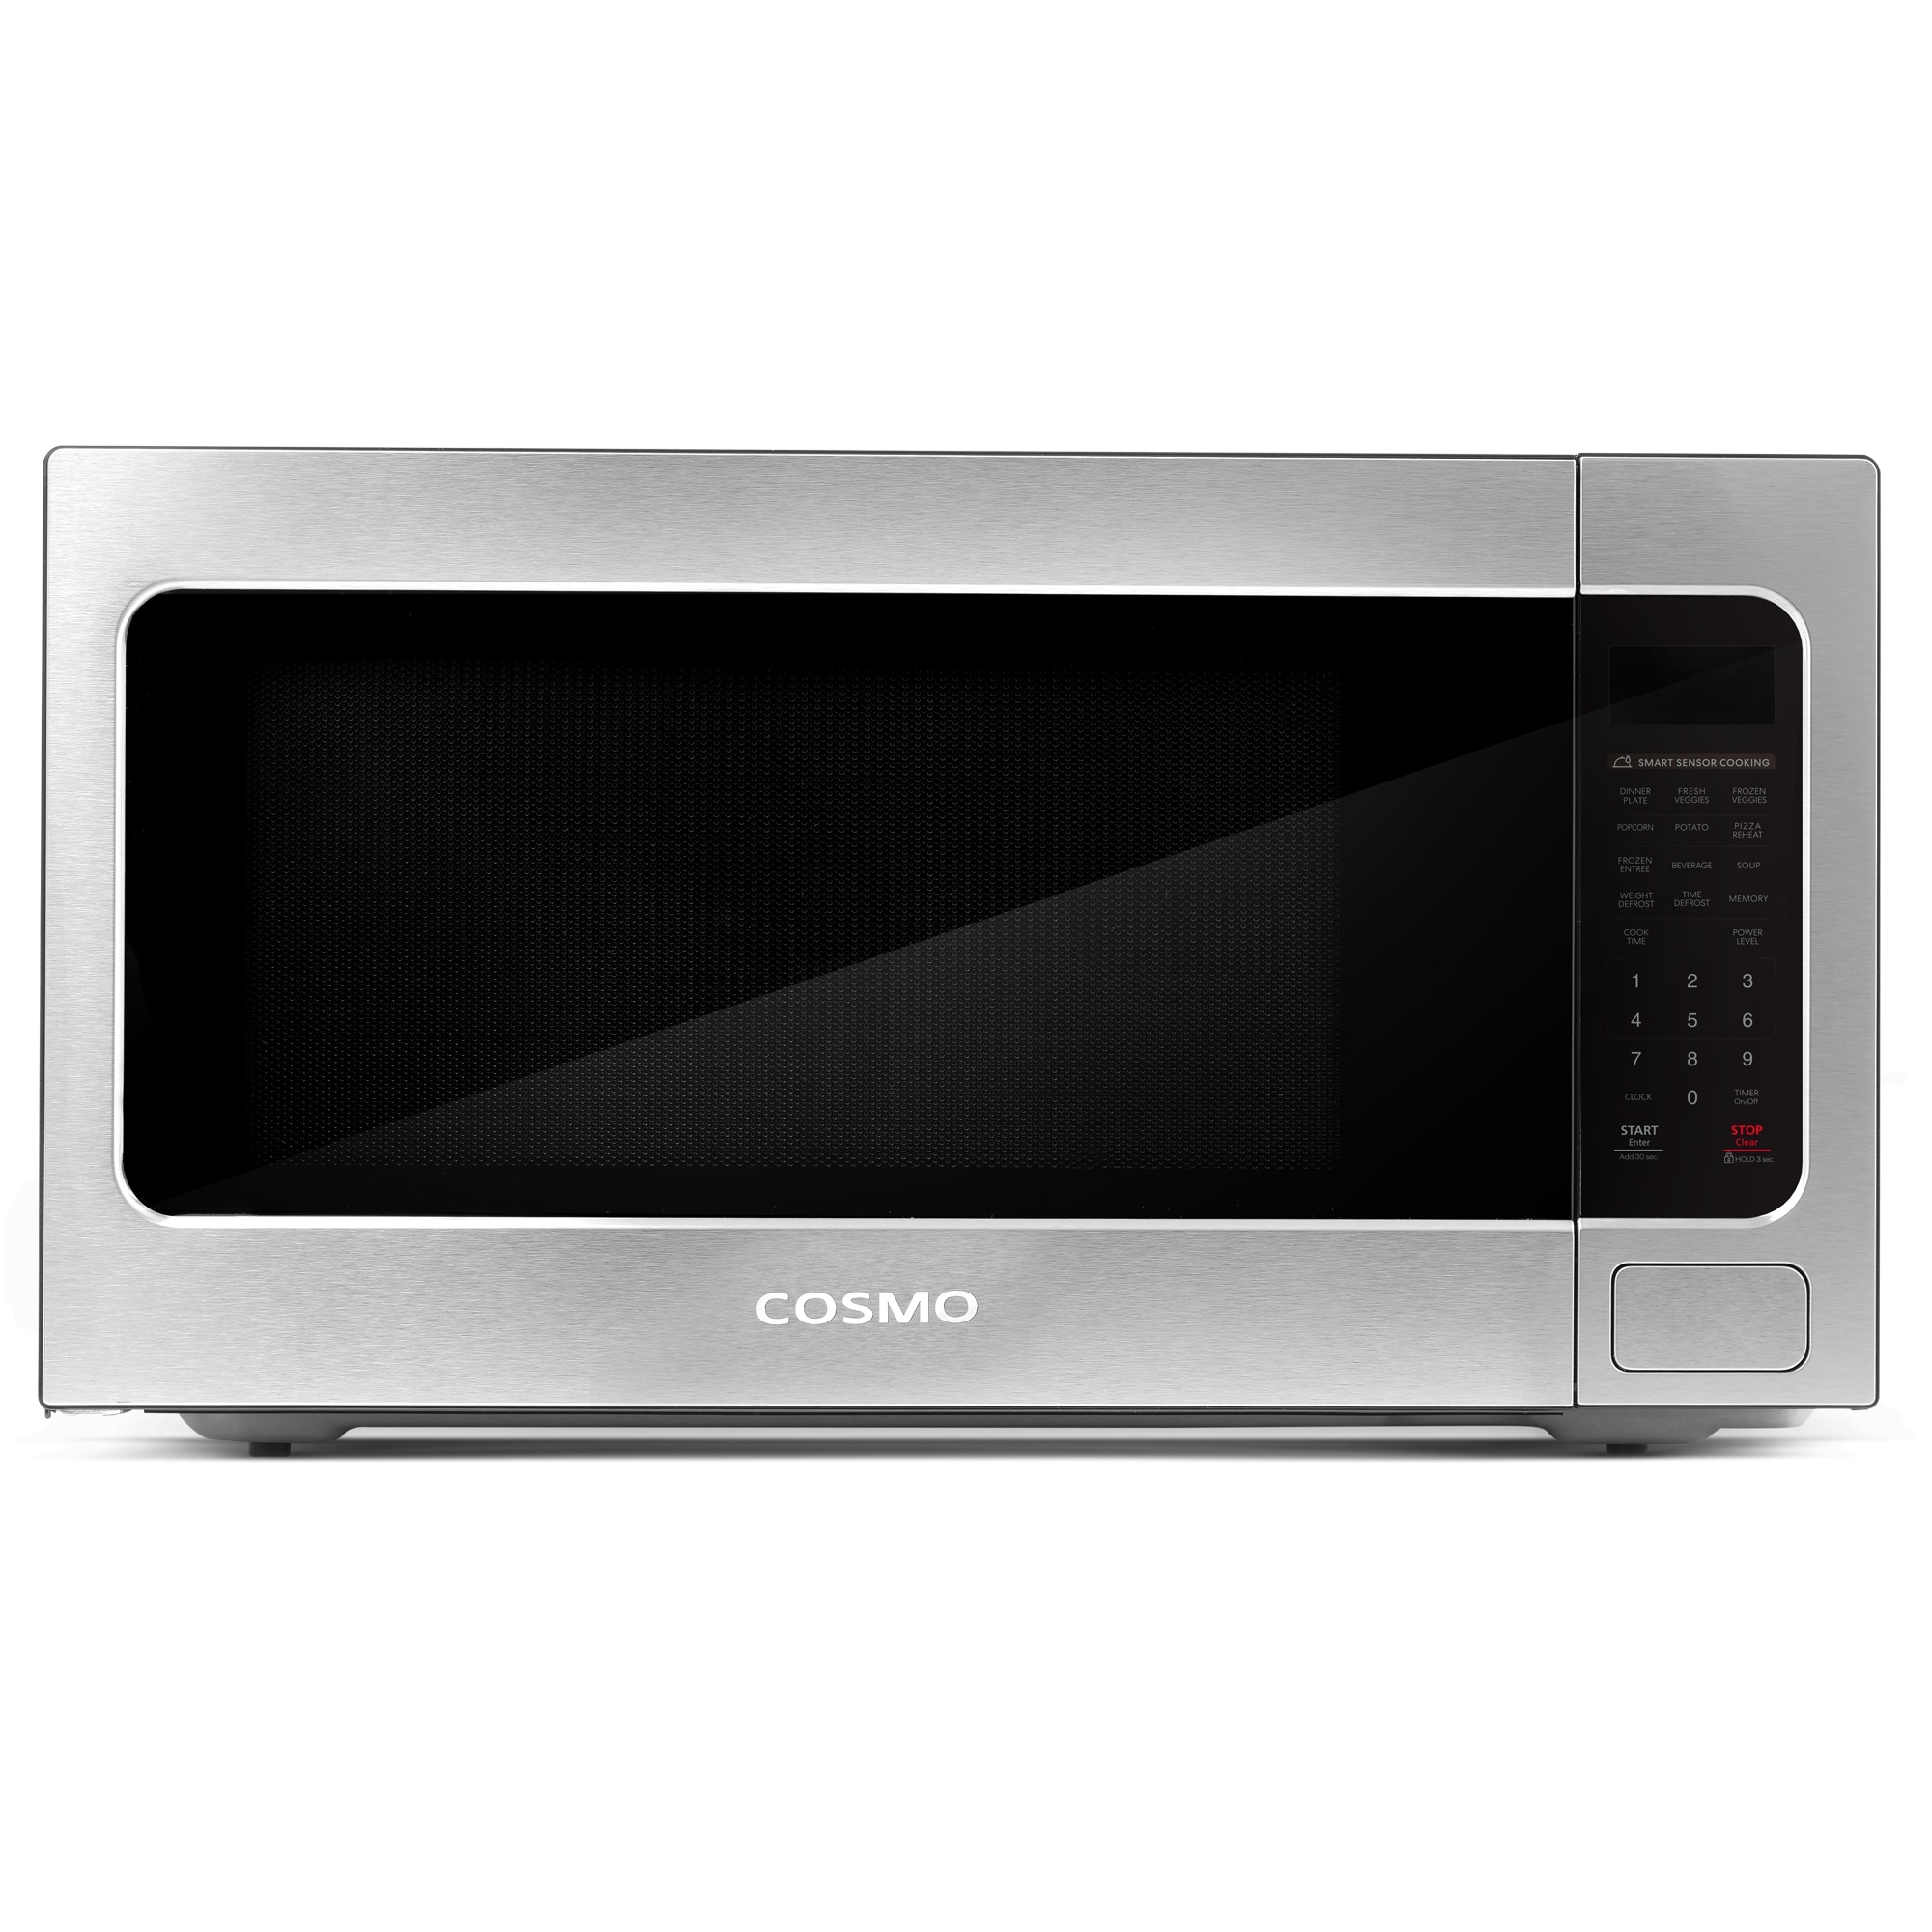 https://ak1.ostkcdn.com/images/products/is/images/direct/523e650467a95615836f1a533fa5488ca756e0d2/24-in.-Countertop-Microwave-Oven-in-Stainless-Steel-Finish.jpg